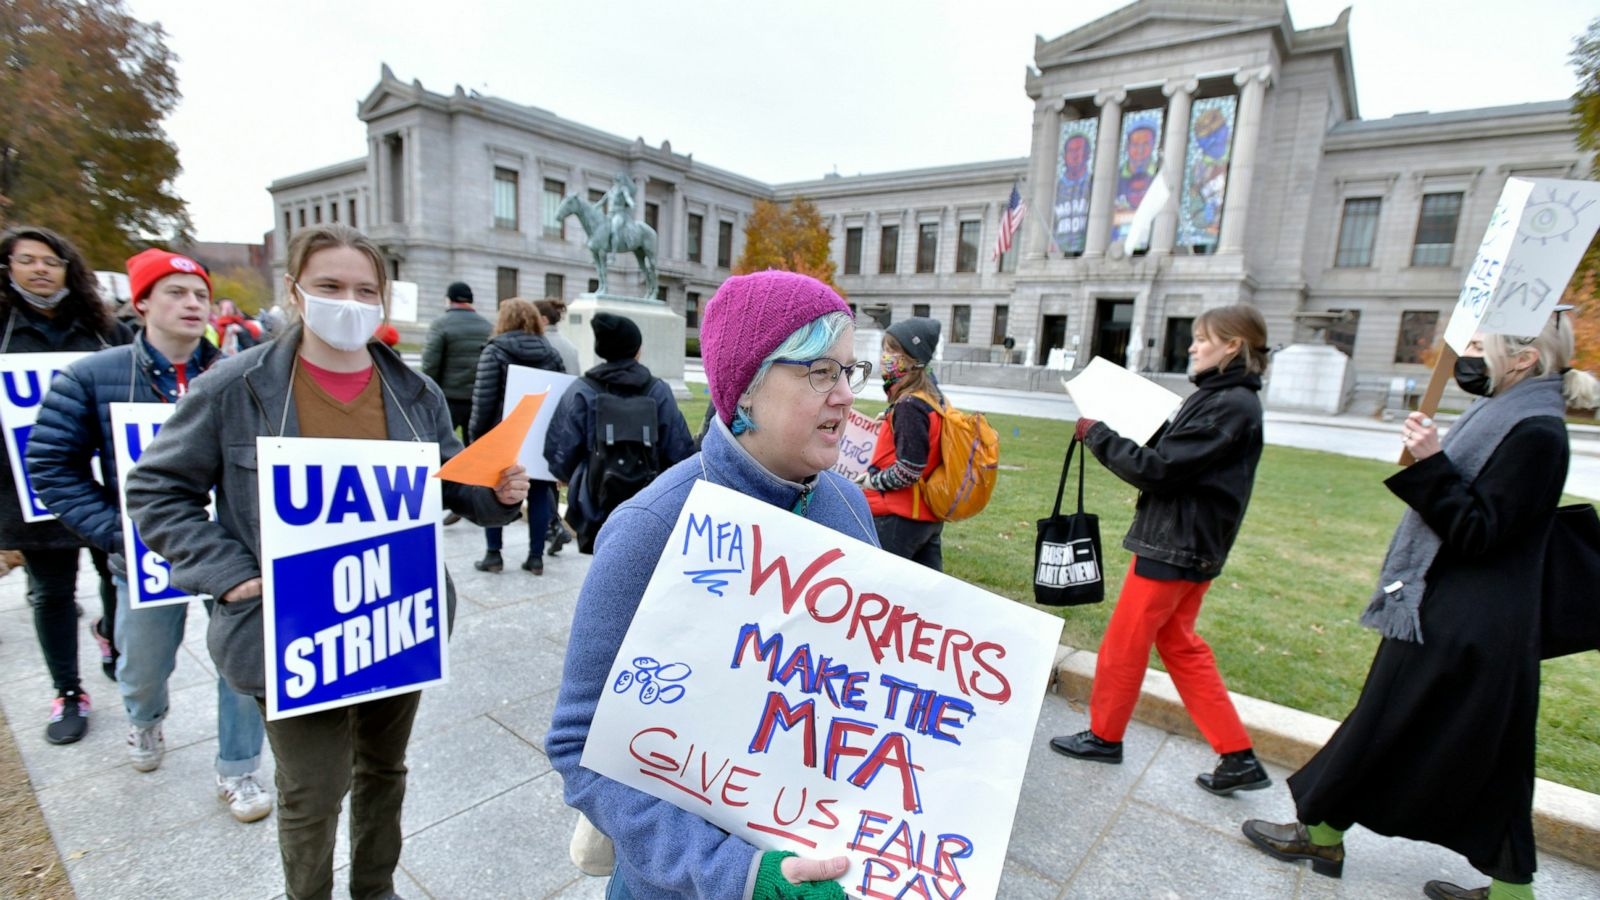 The Boston Museum of Fine Arts enters into a work contract with the workers